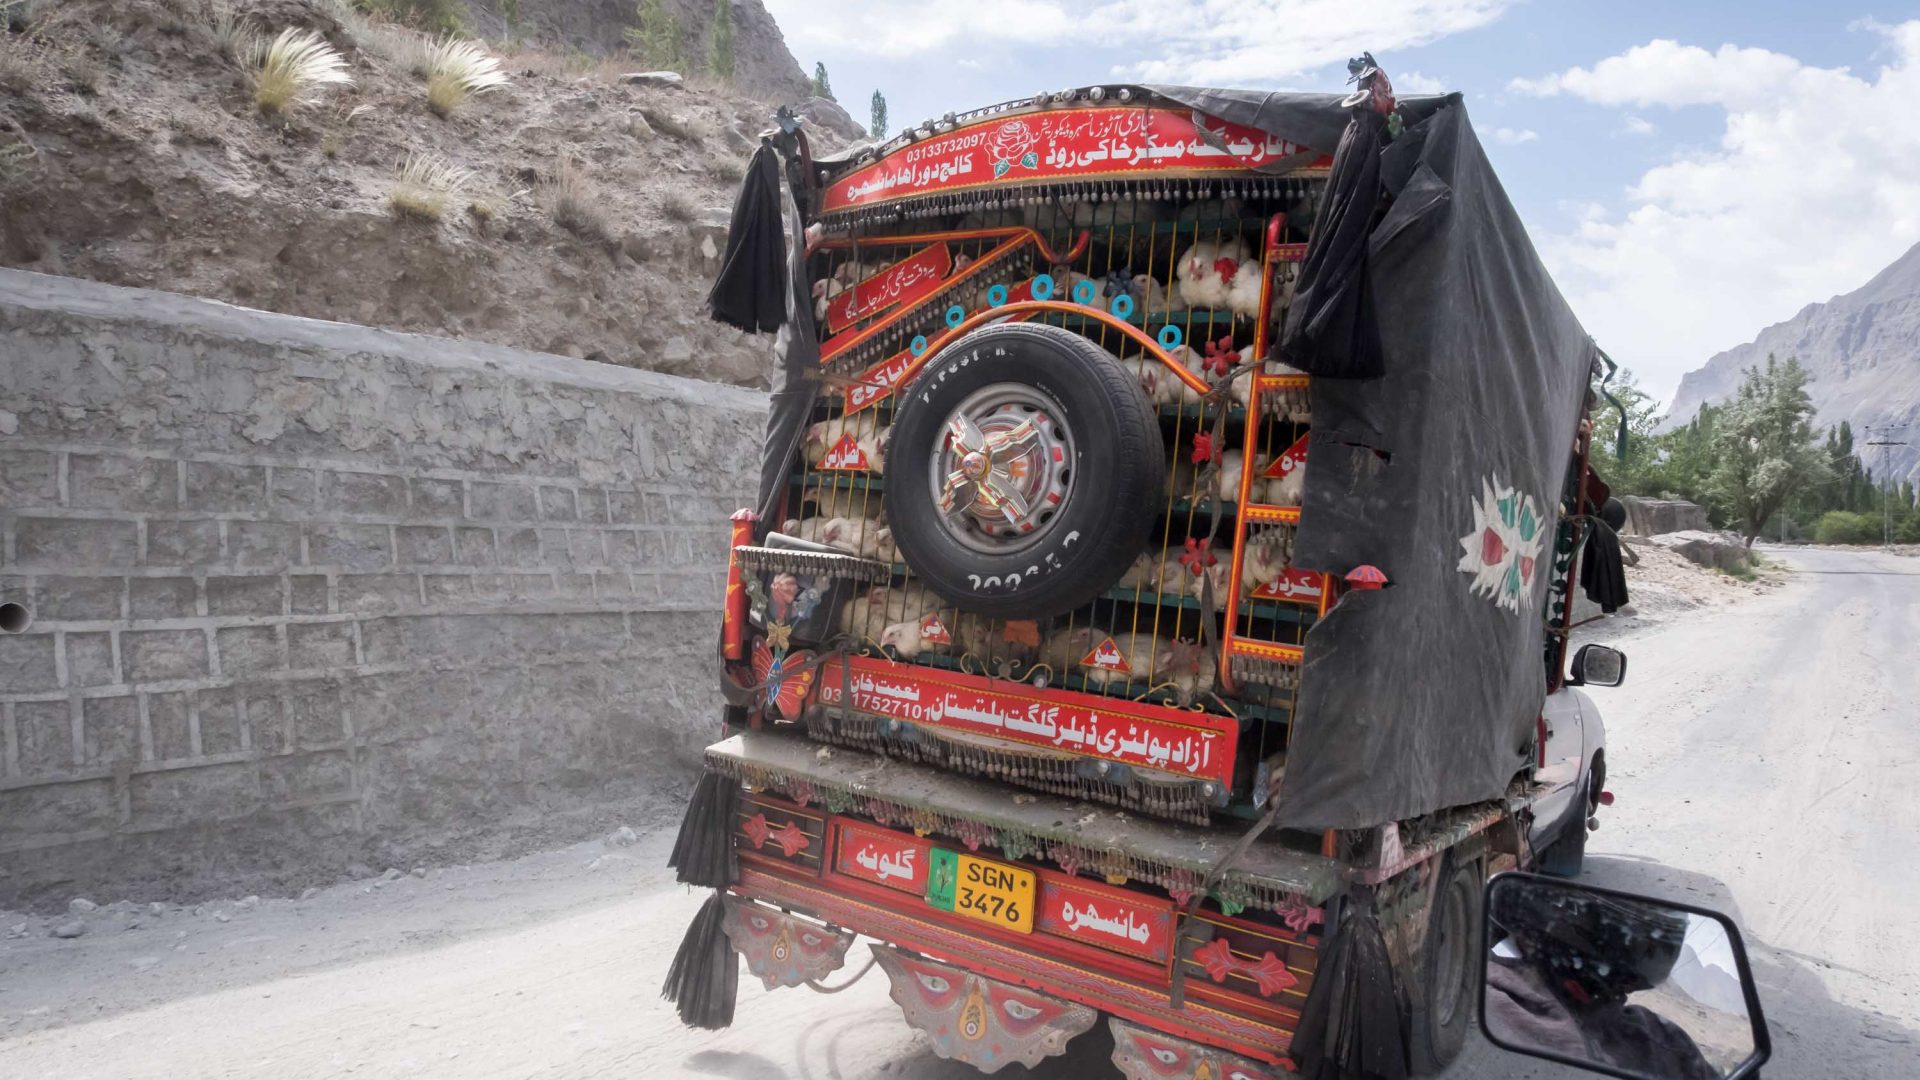 A 'meat wagon' filled with chickens, some dead and some alive, on the road in Gilgit-Baltistan, Pakistan.